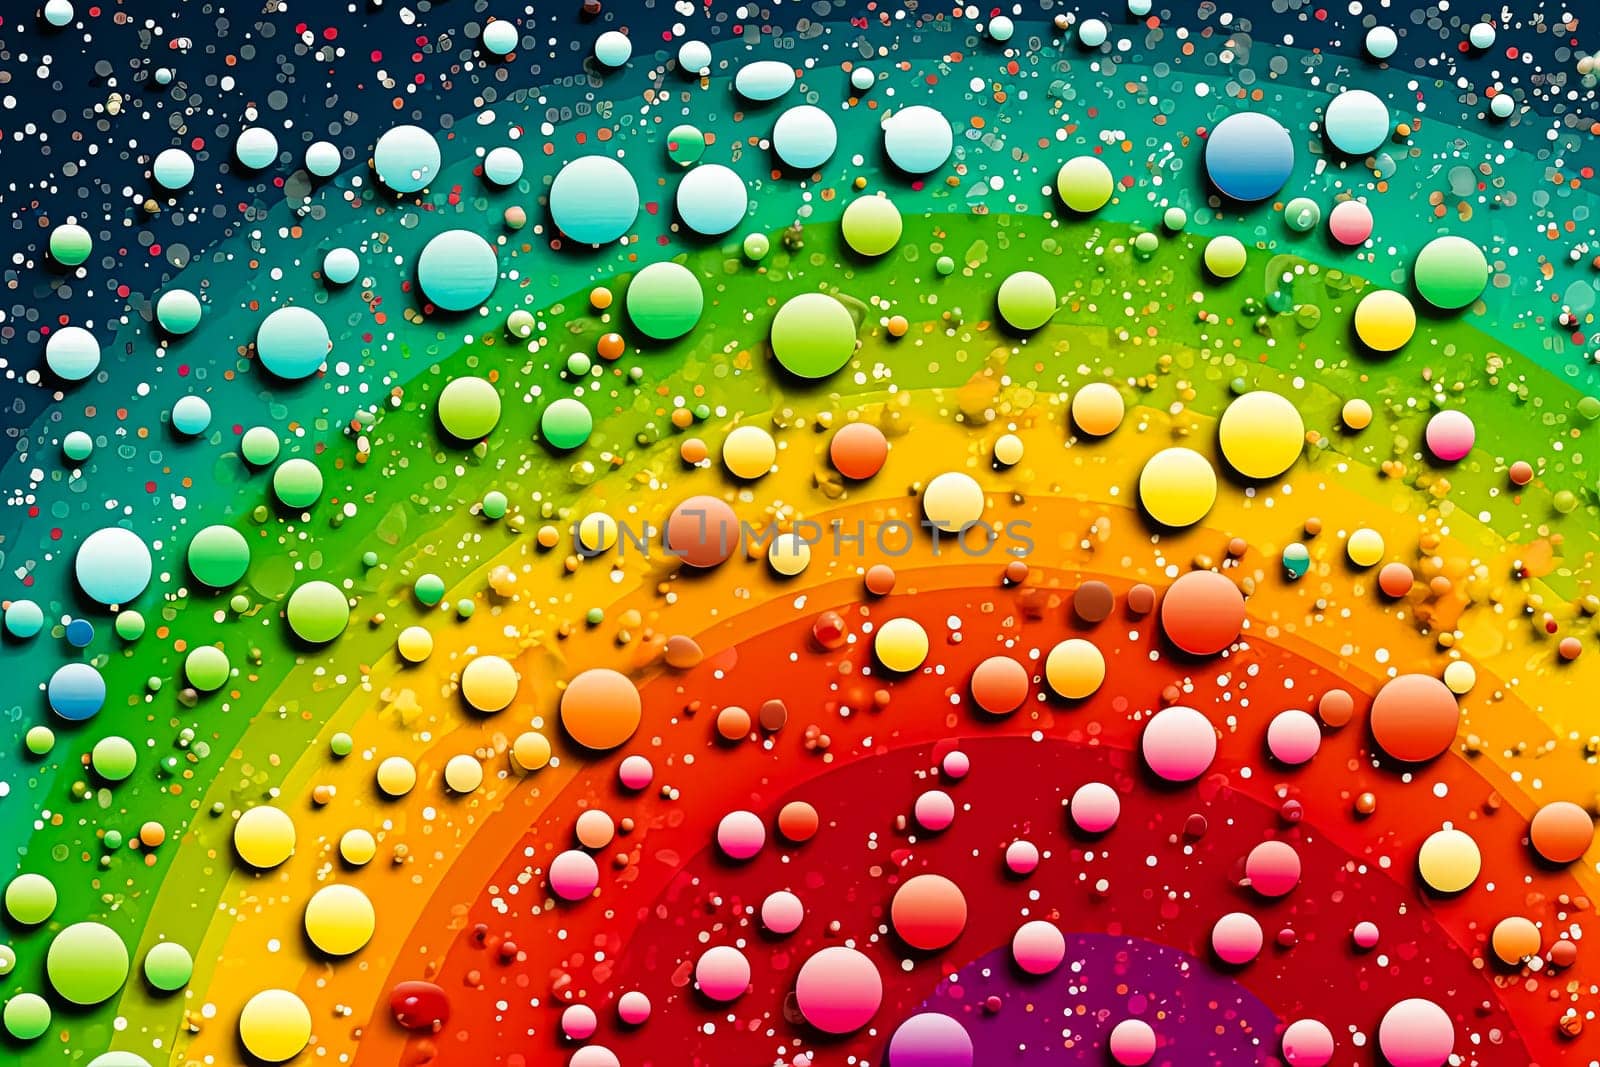 A colorful rainbow with many small, round, colorful dots. The dots are scattered all over the rainbow, creating a vibrant and lively atmosphere